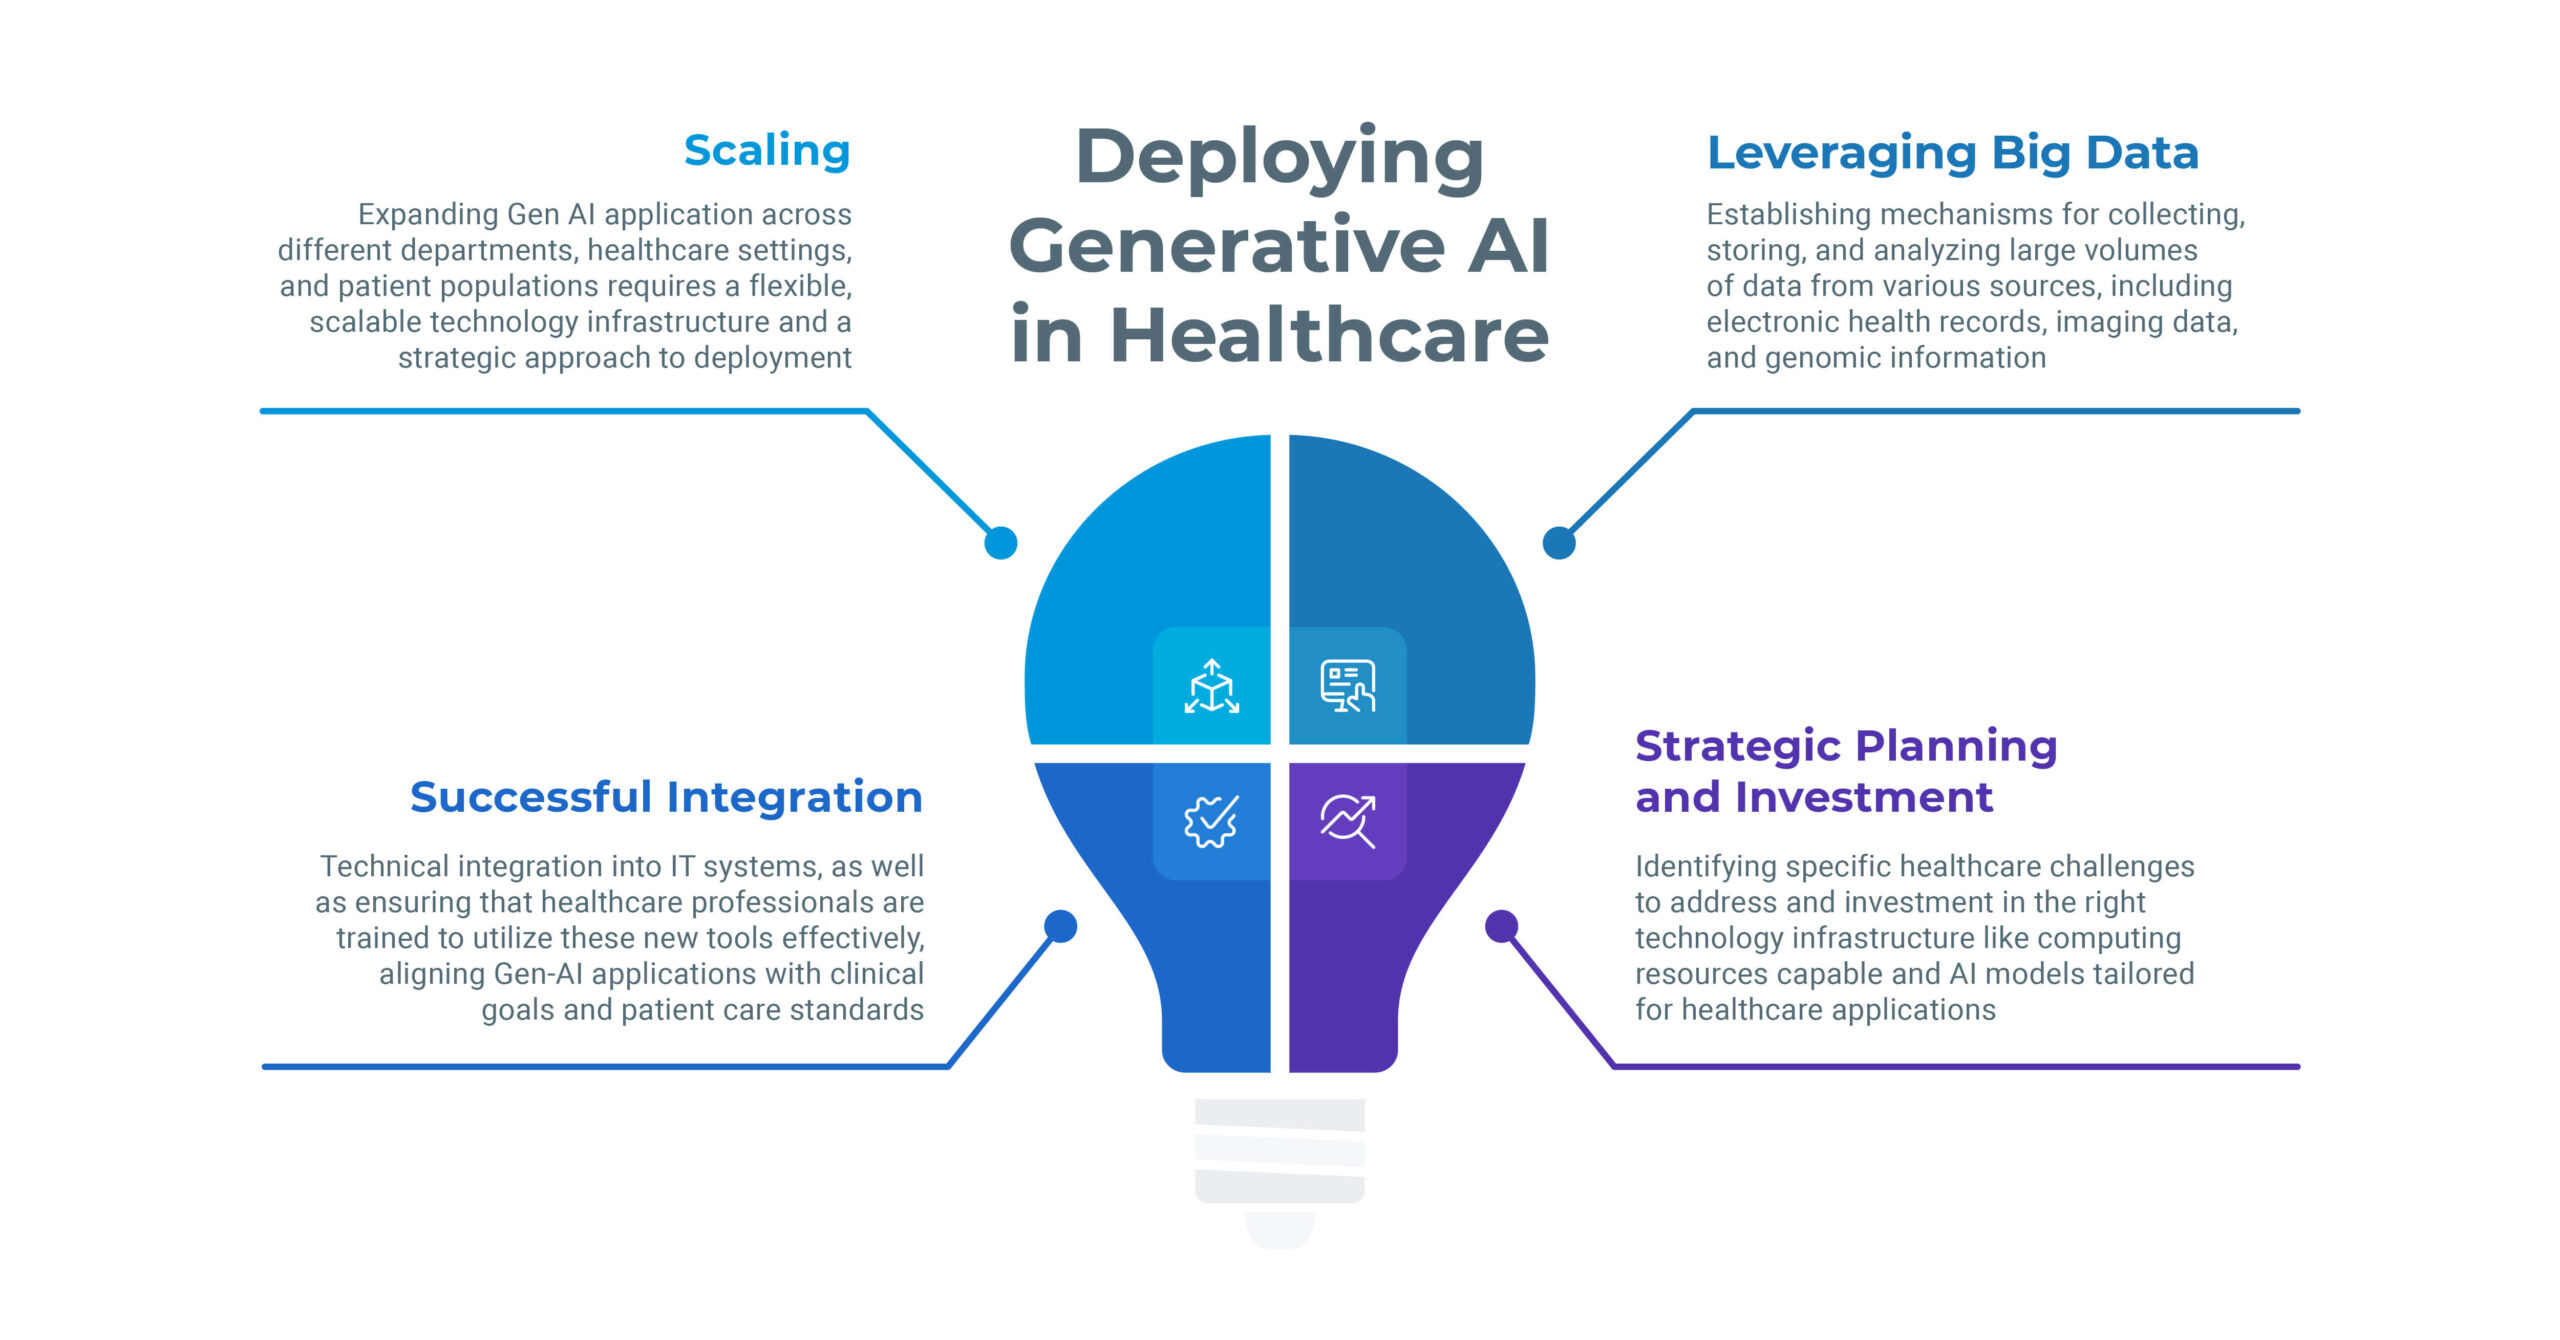 the stage of deploying generative ai in healthcare